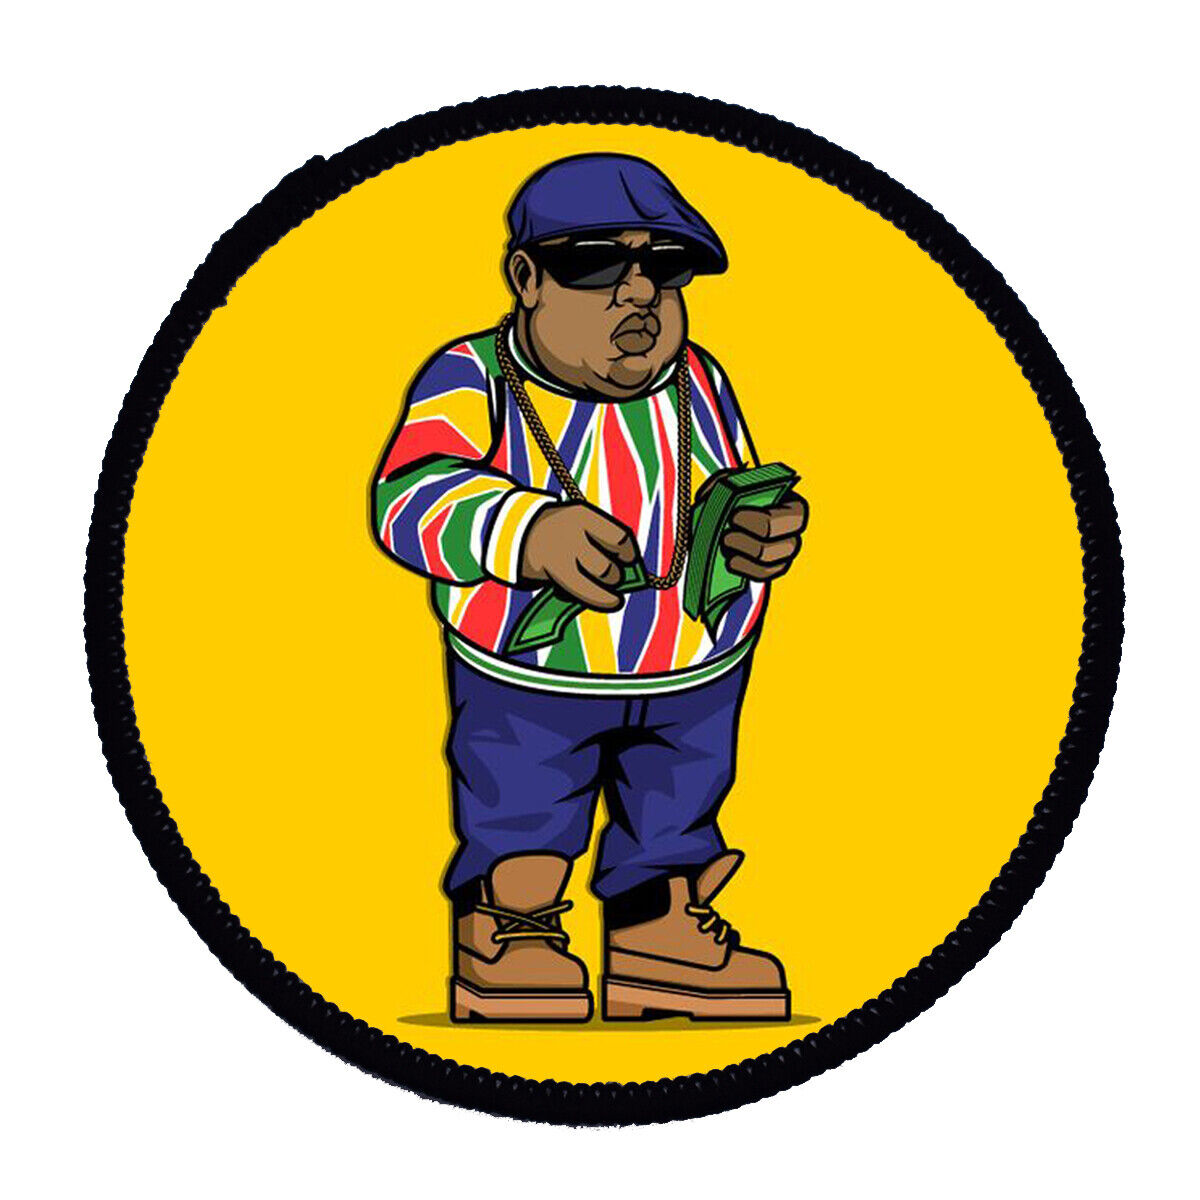 Circular Printed Patch - Notorious BIG Money Cartoon Sew On Badge in 3 sizes